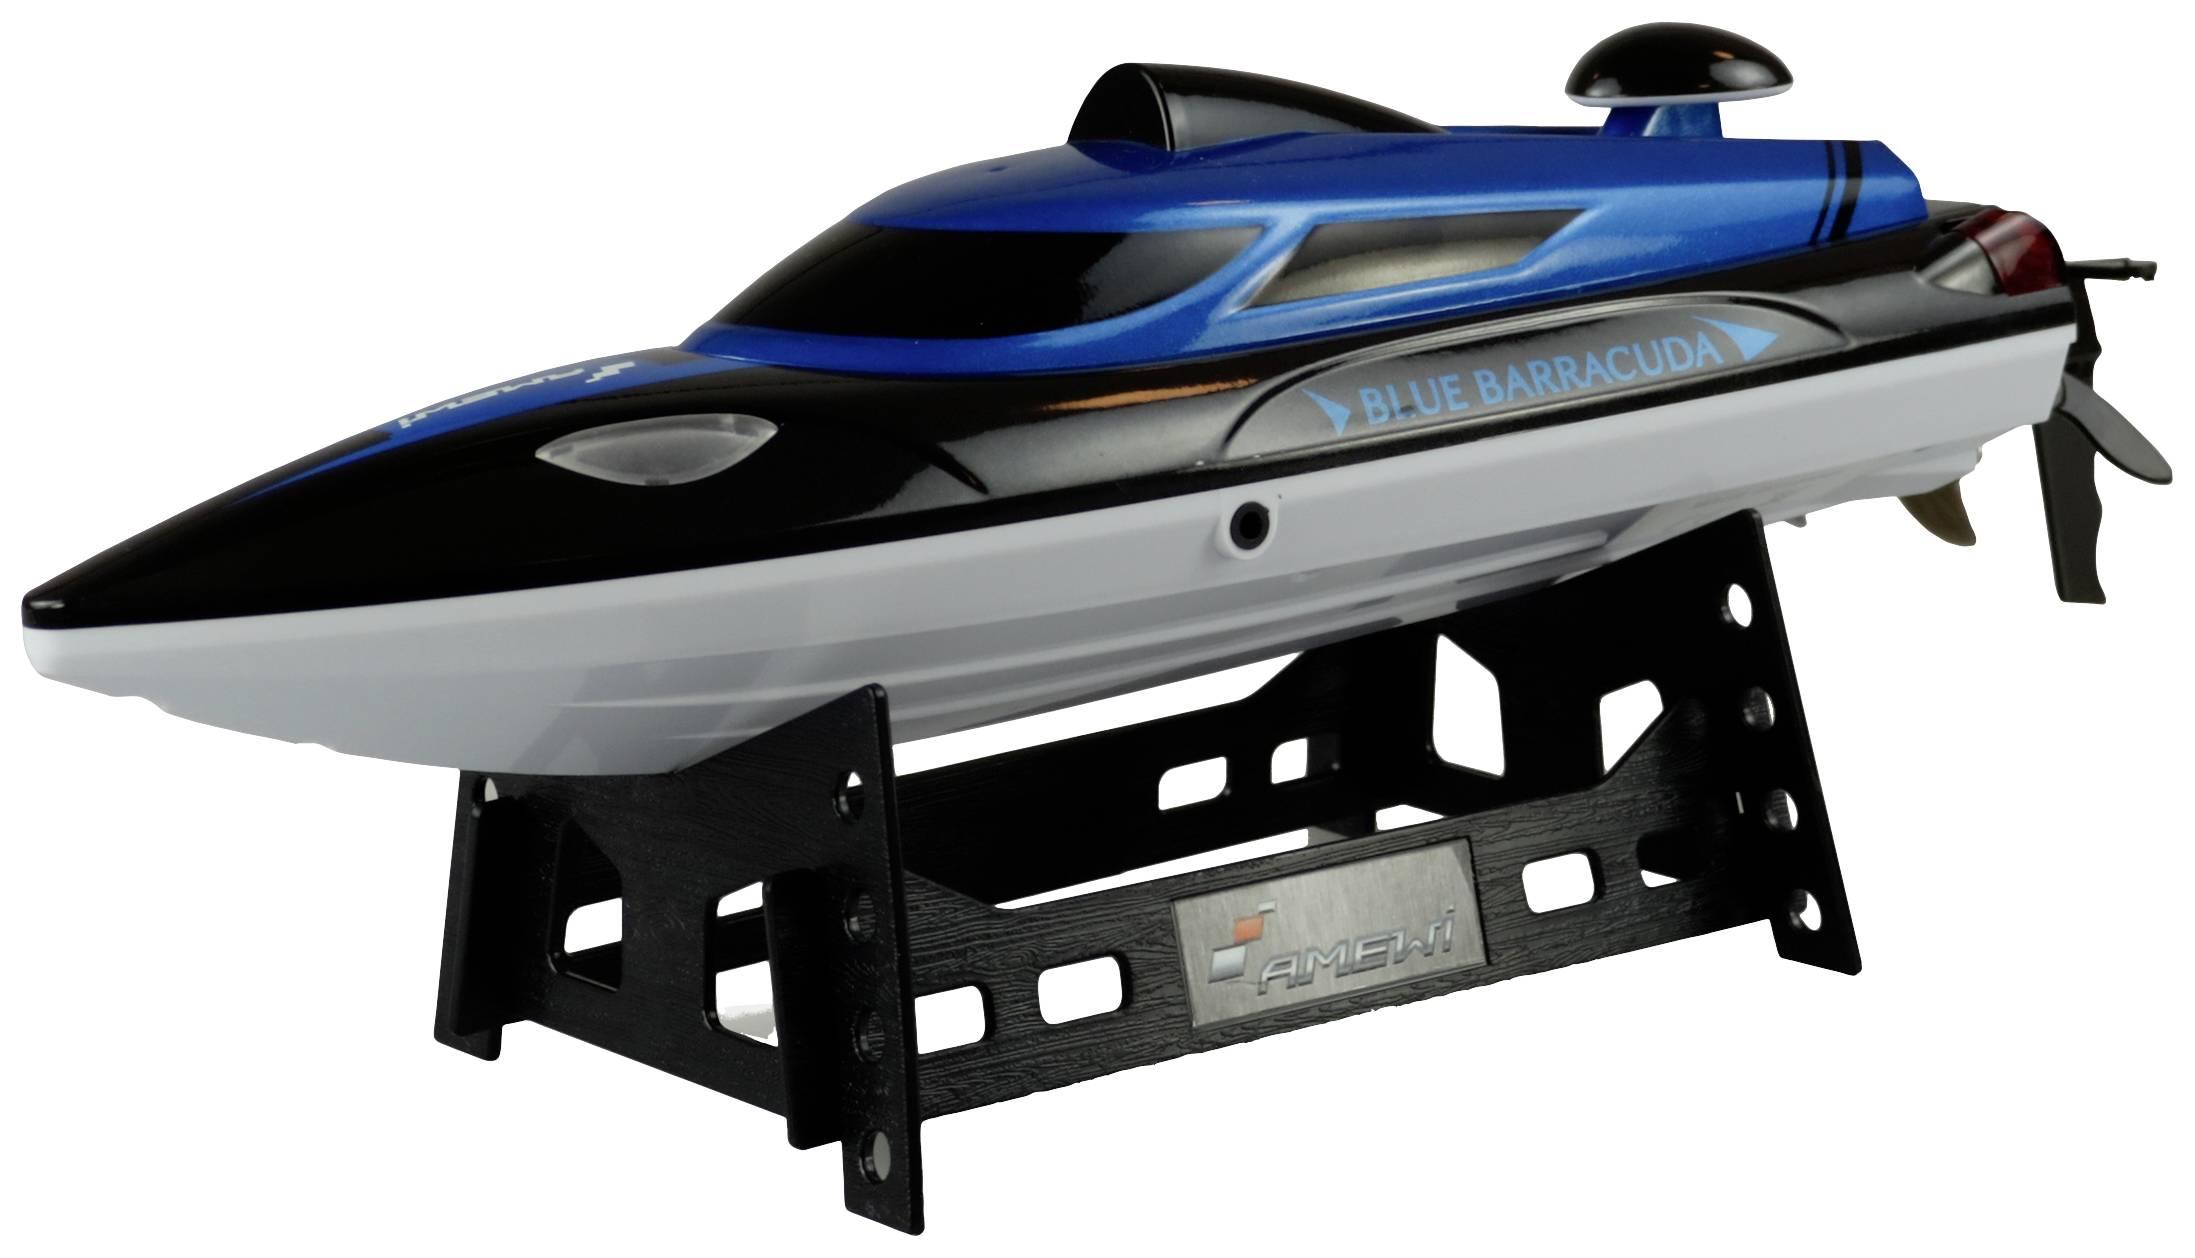 Amewi Rc Boat: Enhance Your Amewi RC Boat: Top Accessories and Upgrades